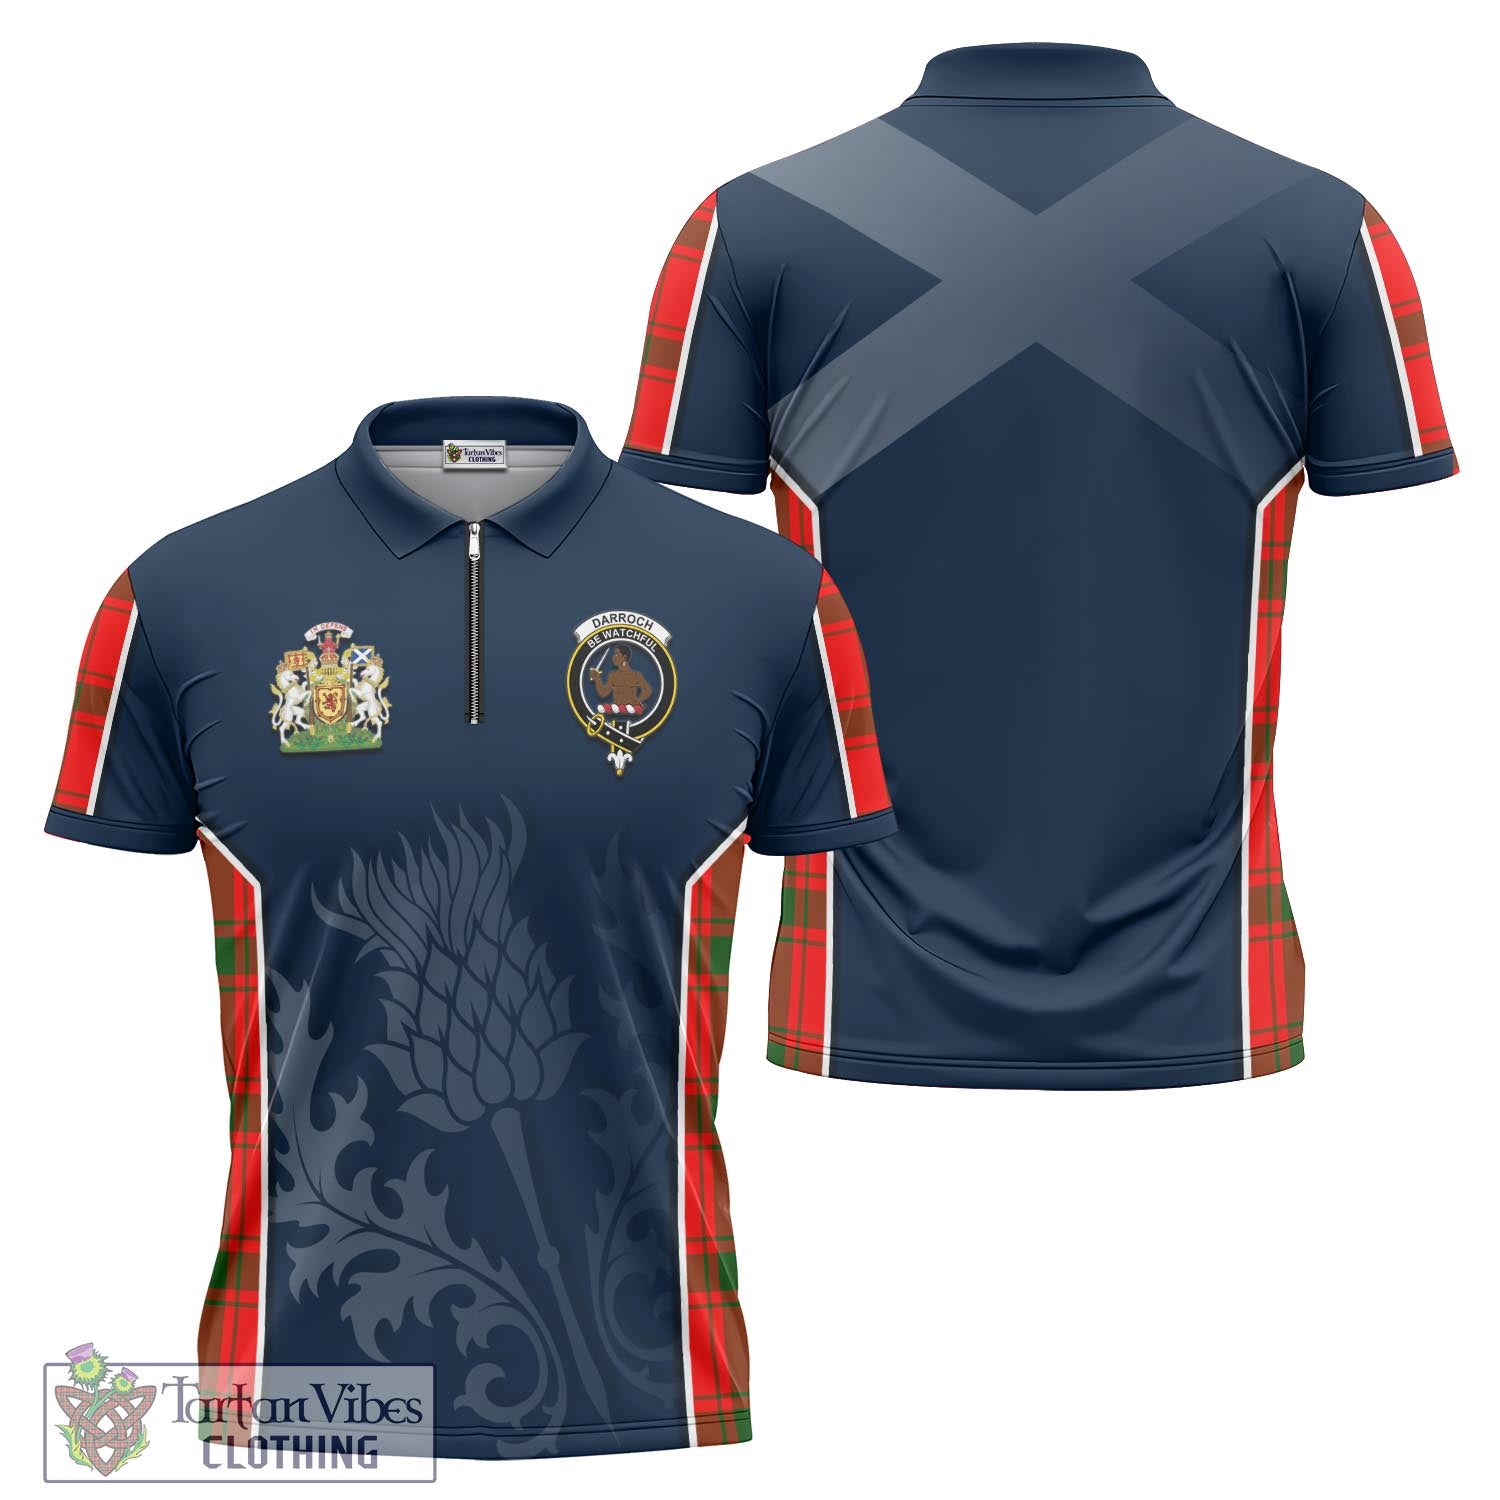 Tartan Vibes Clothing Darroch Tartan Zipper Polo Shirt with Family Crest and Scottish Thistle Vibes Sport Style